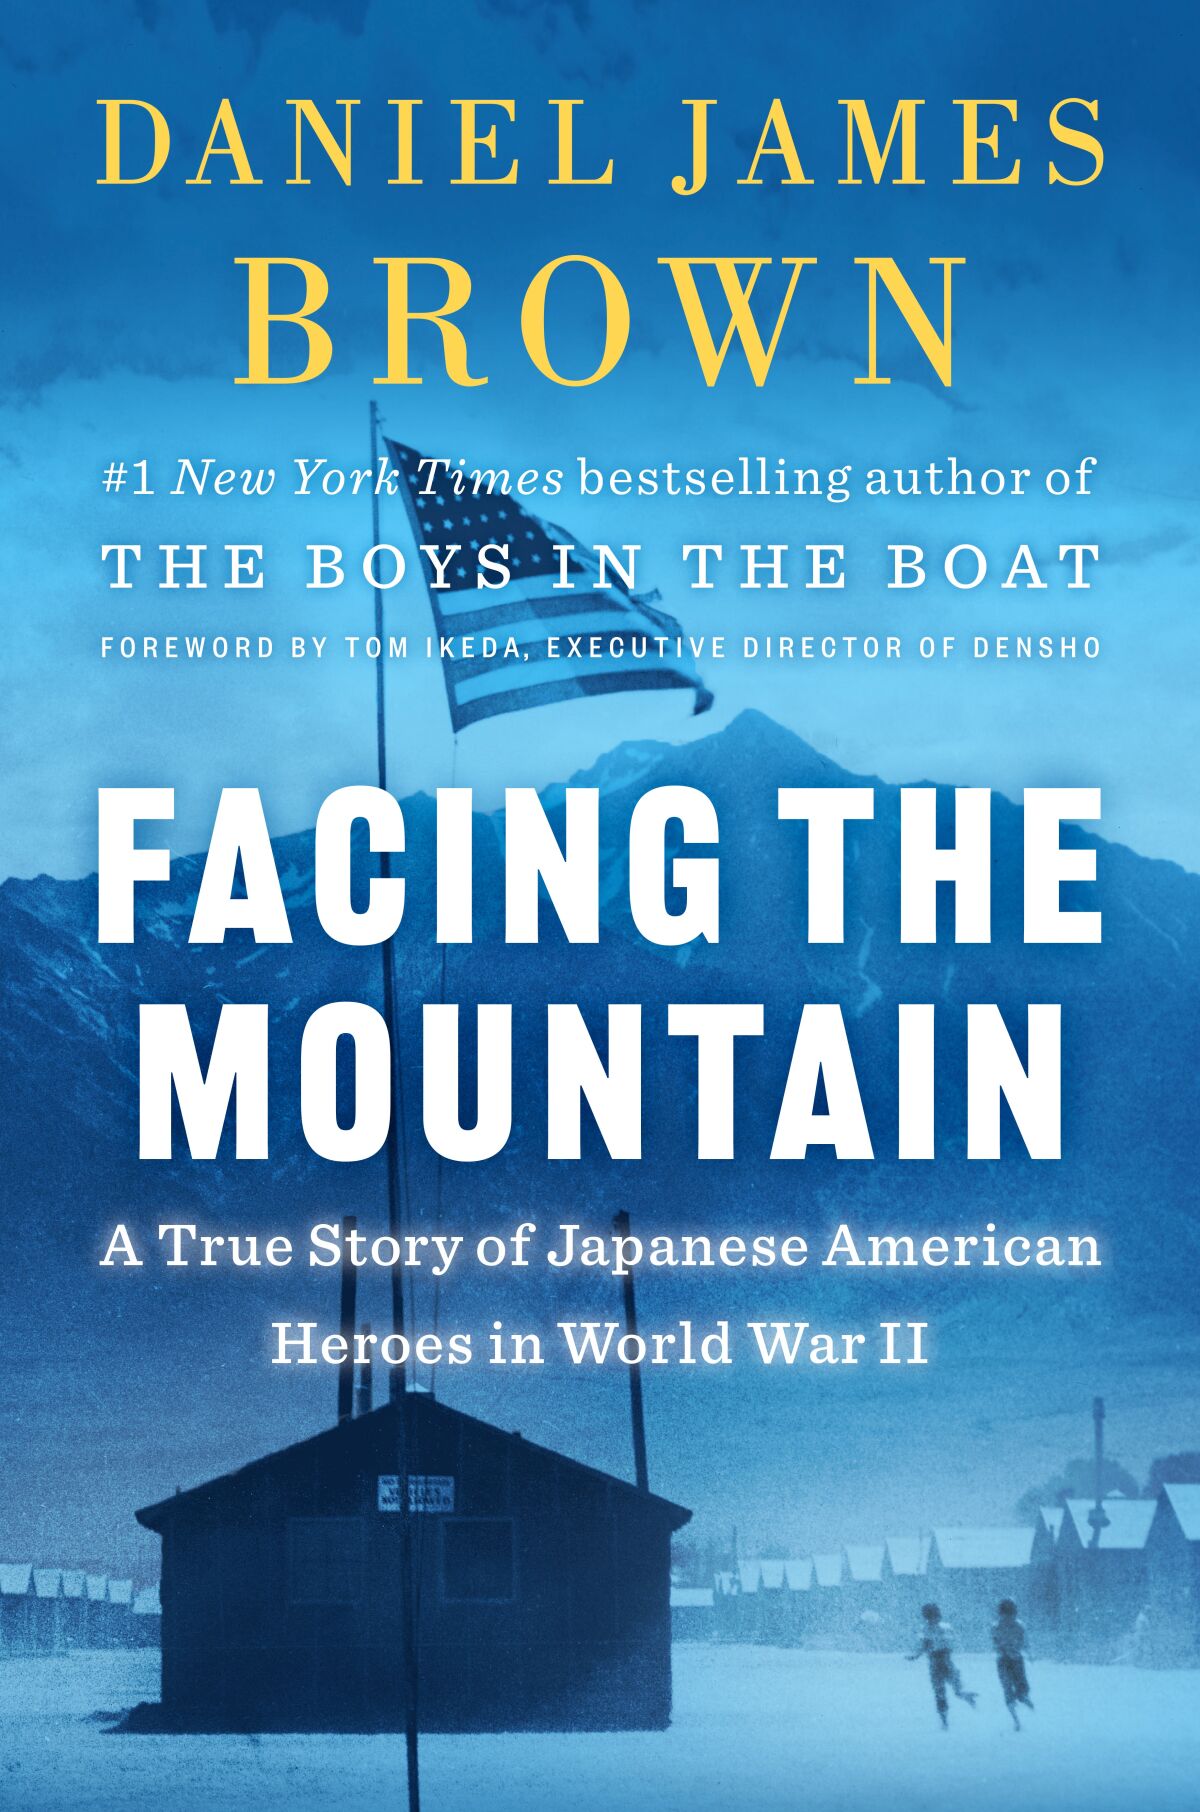 "Facing the Mountain: A True Story of Japanese American Heroes in World War II," by Daniel James Brown